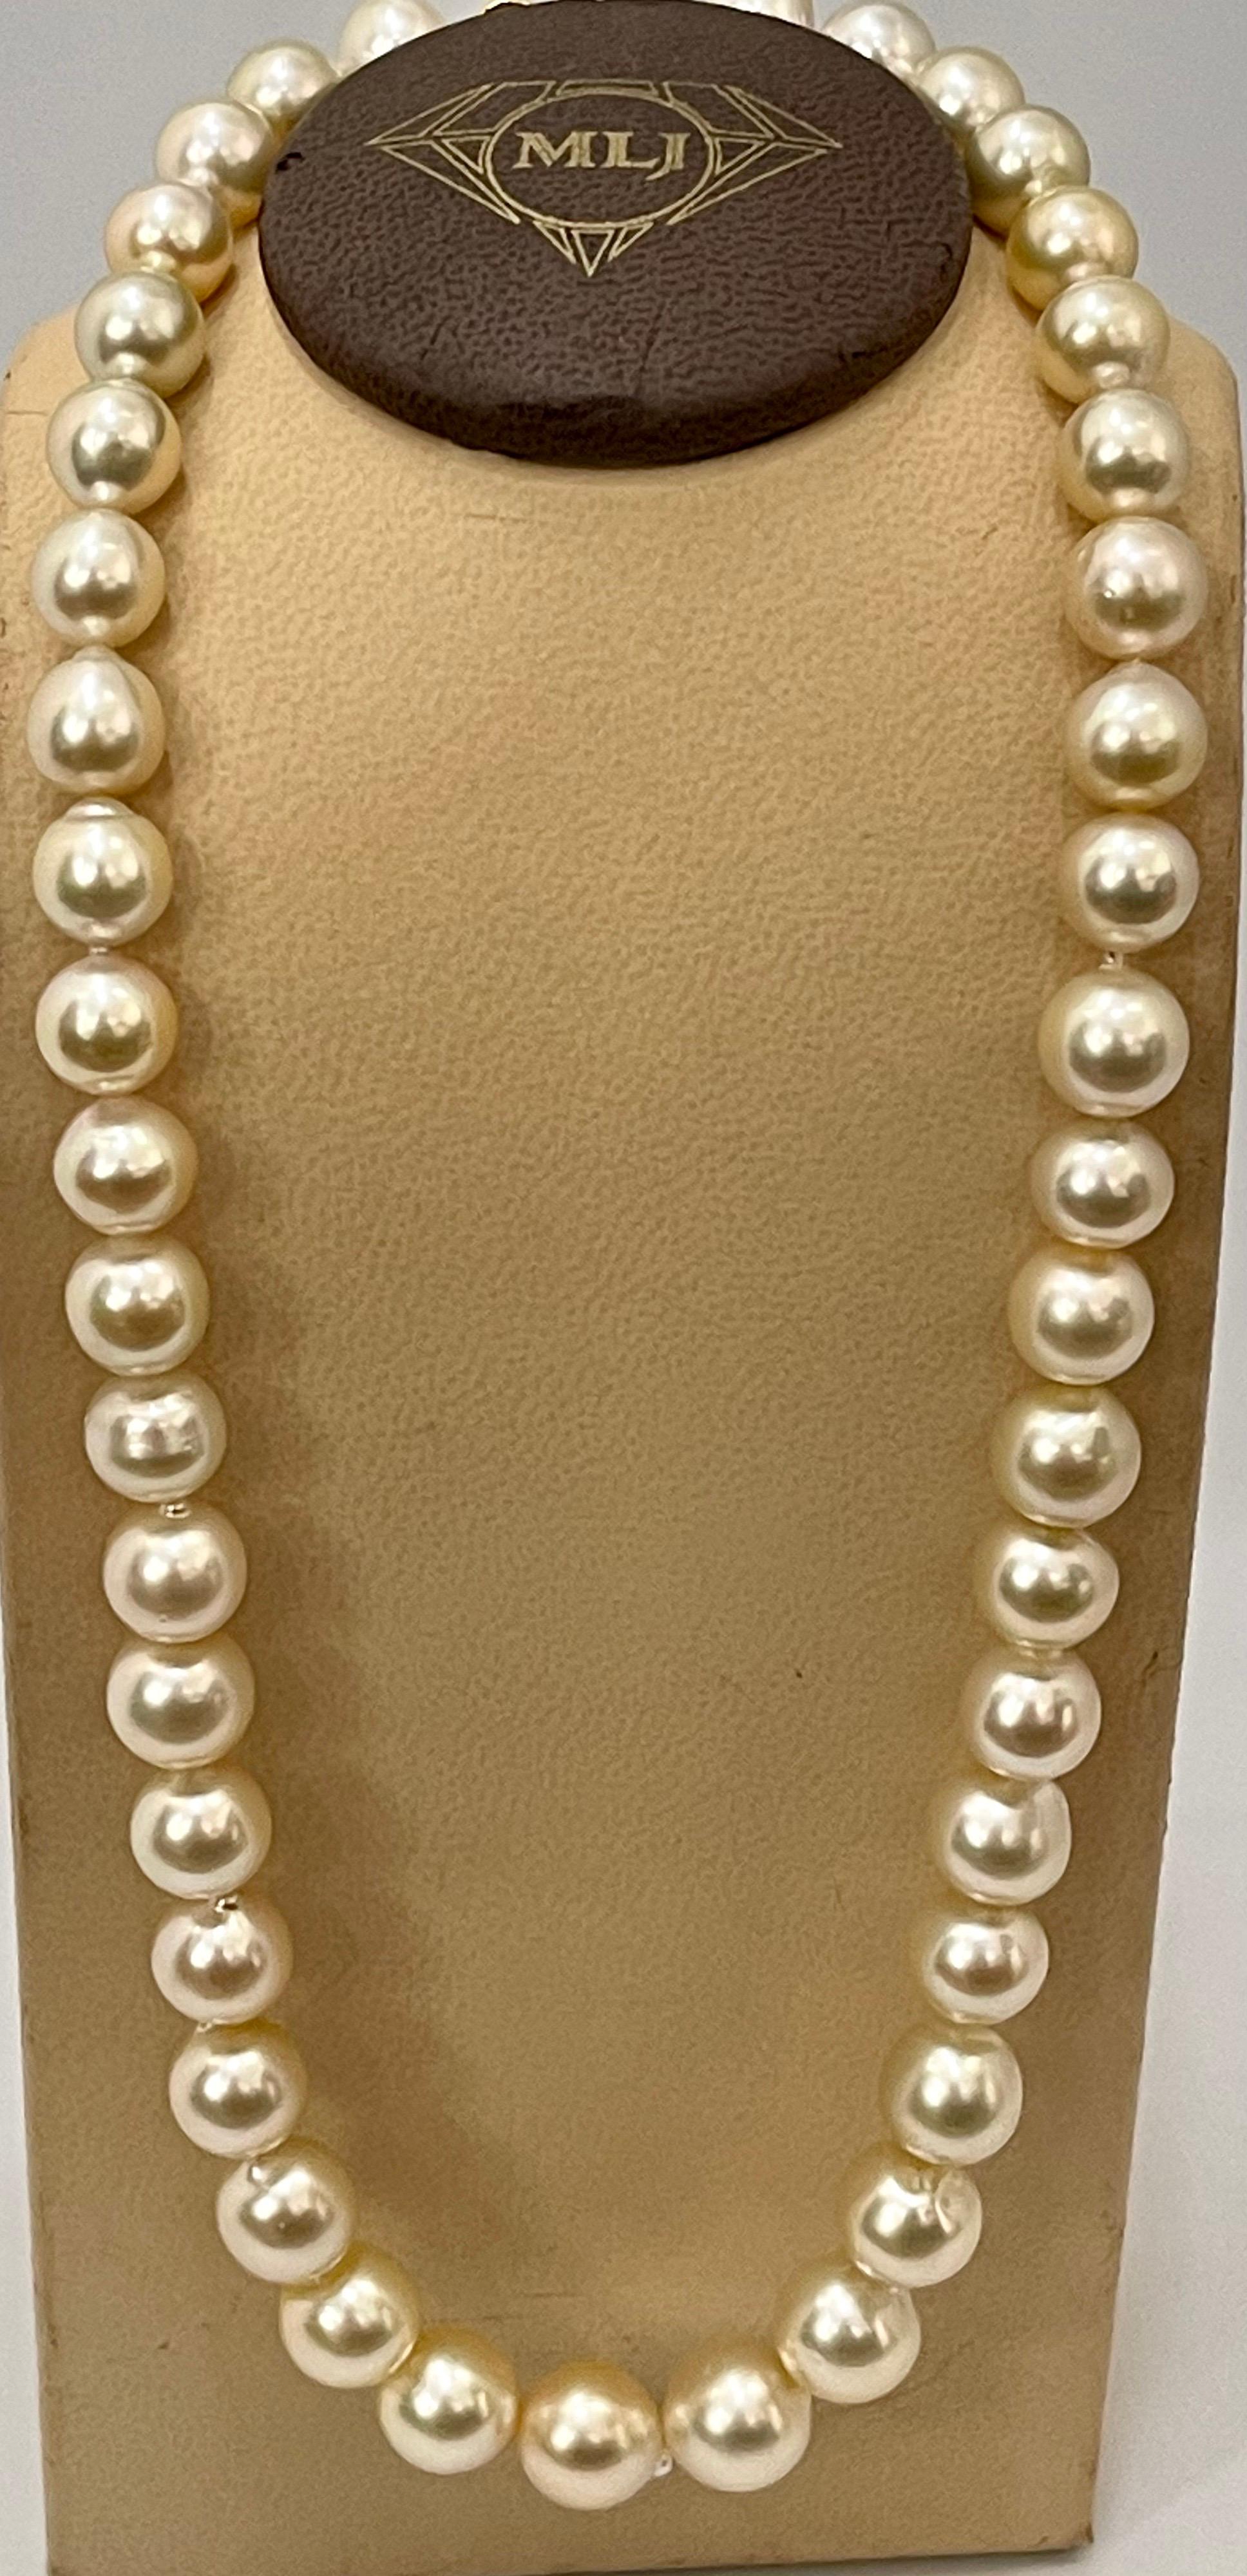 Graduating Cream Color South Sea Pearls Necklace 14 Karat Yellow Gold Clasp For Sale 5